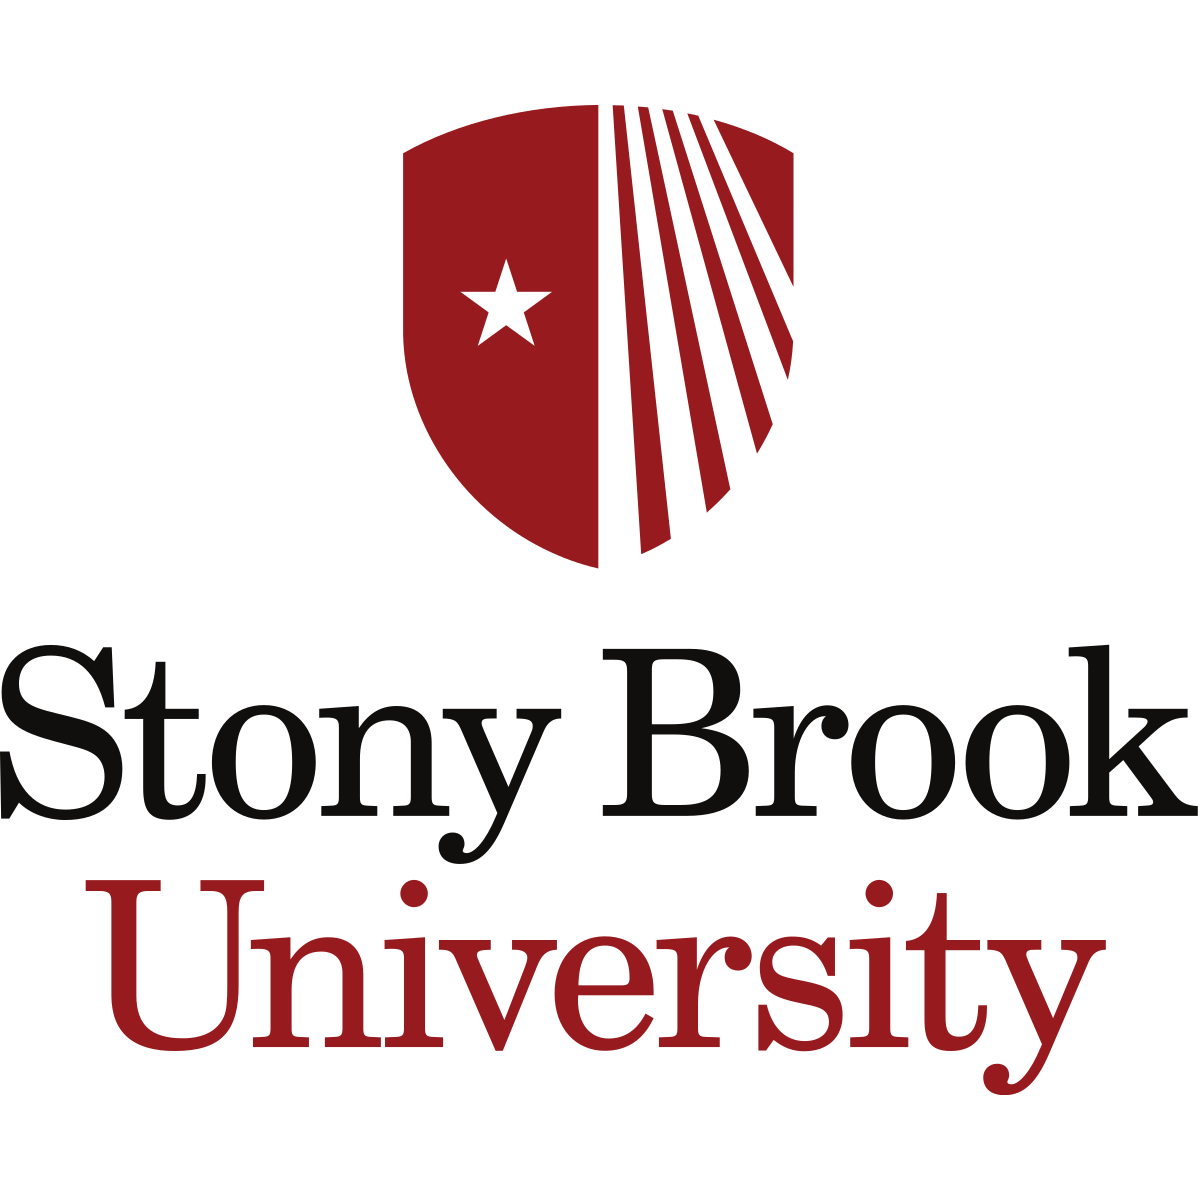 Stony Brook University Packing & MoveIn Checklist Campus Arrival